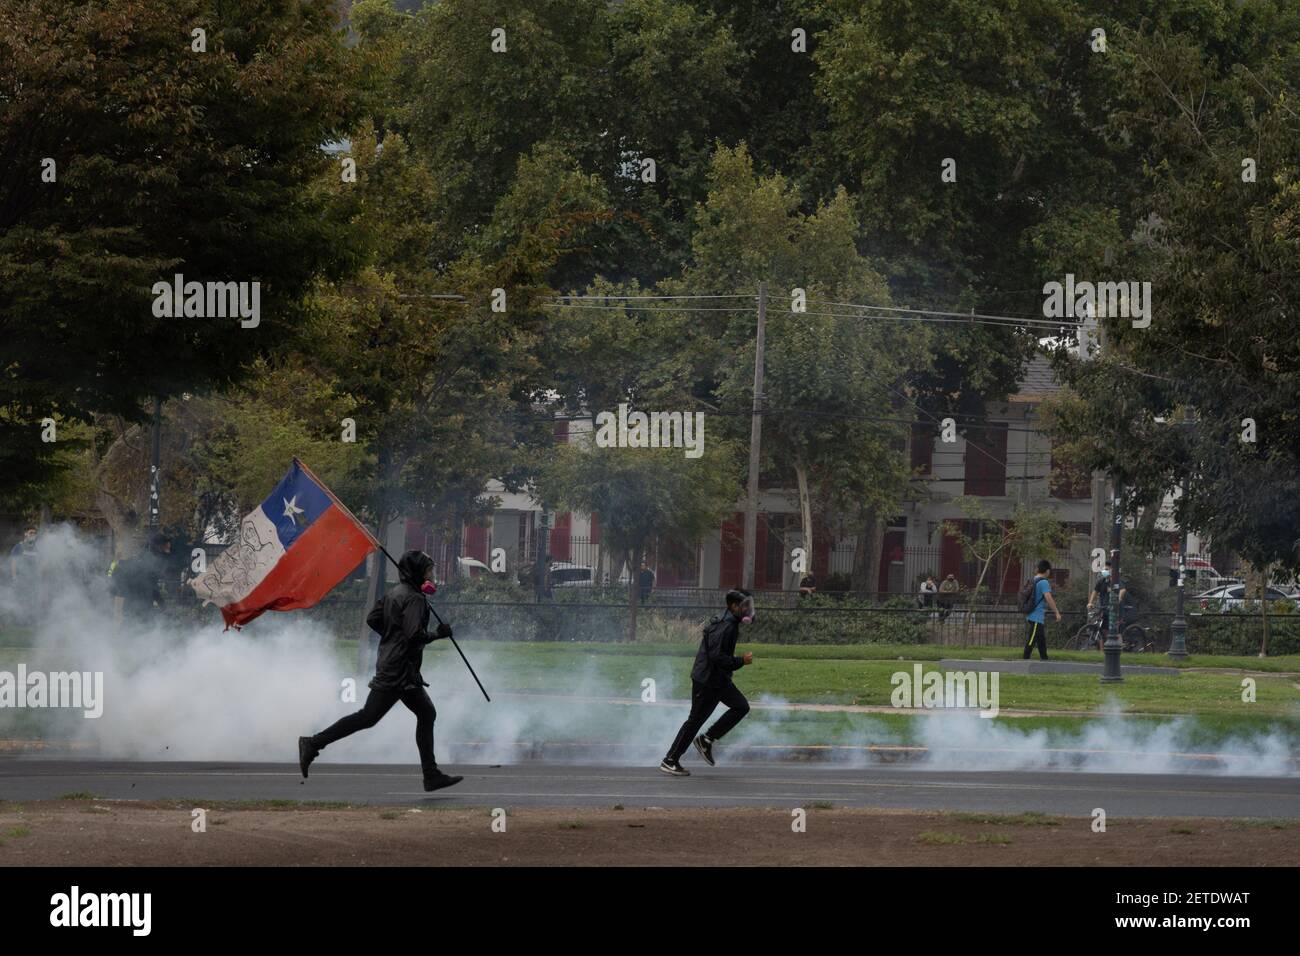 Santiago, Metropolitana, Chile. 1st Mar, 2021. Protesters rush to confront the police, after the police have thrown tear gas bombs. This protest was called by the students, as a day of student mobilization. Credit: Matias Basualdo/ZUMA Wire/Alamy Live News Stock Photo